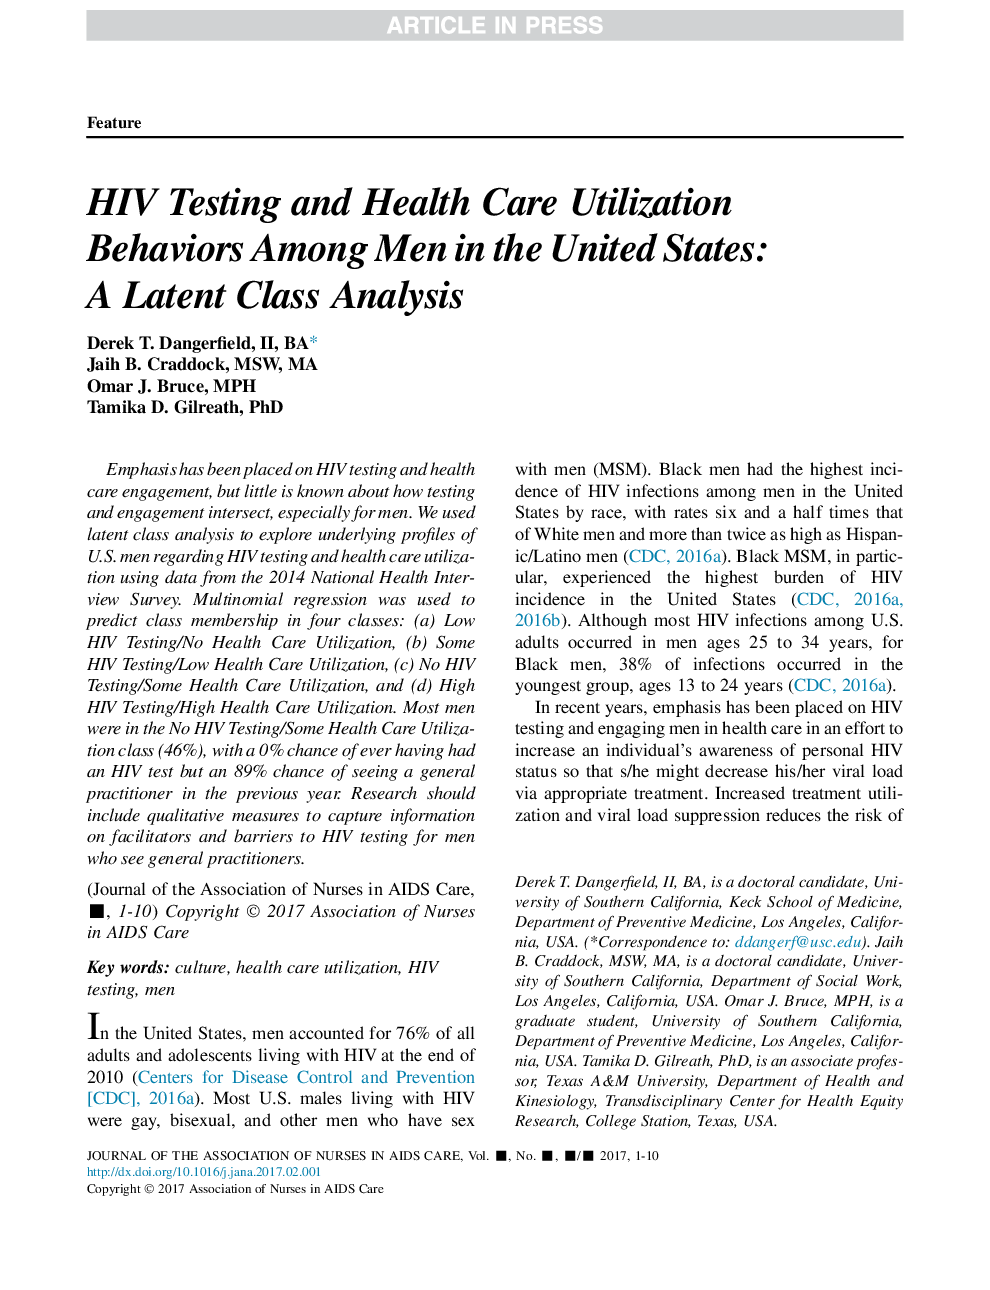 HIV Testing and Health Care Utilization Behaviors Among Men in the United States: A Latent Class Analysis